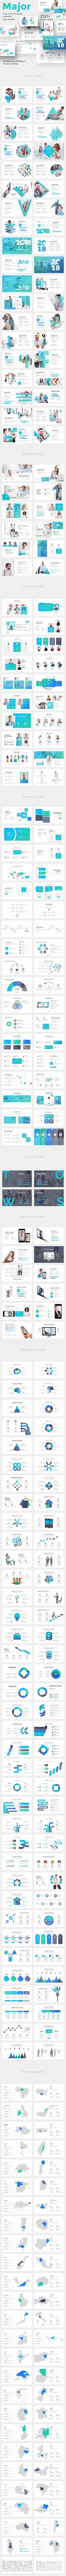 Major Business Pitch Deck Powerpoint Template